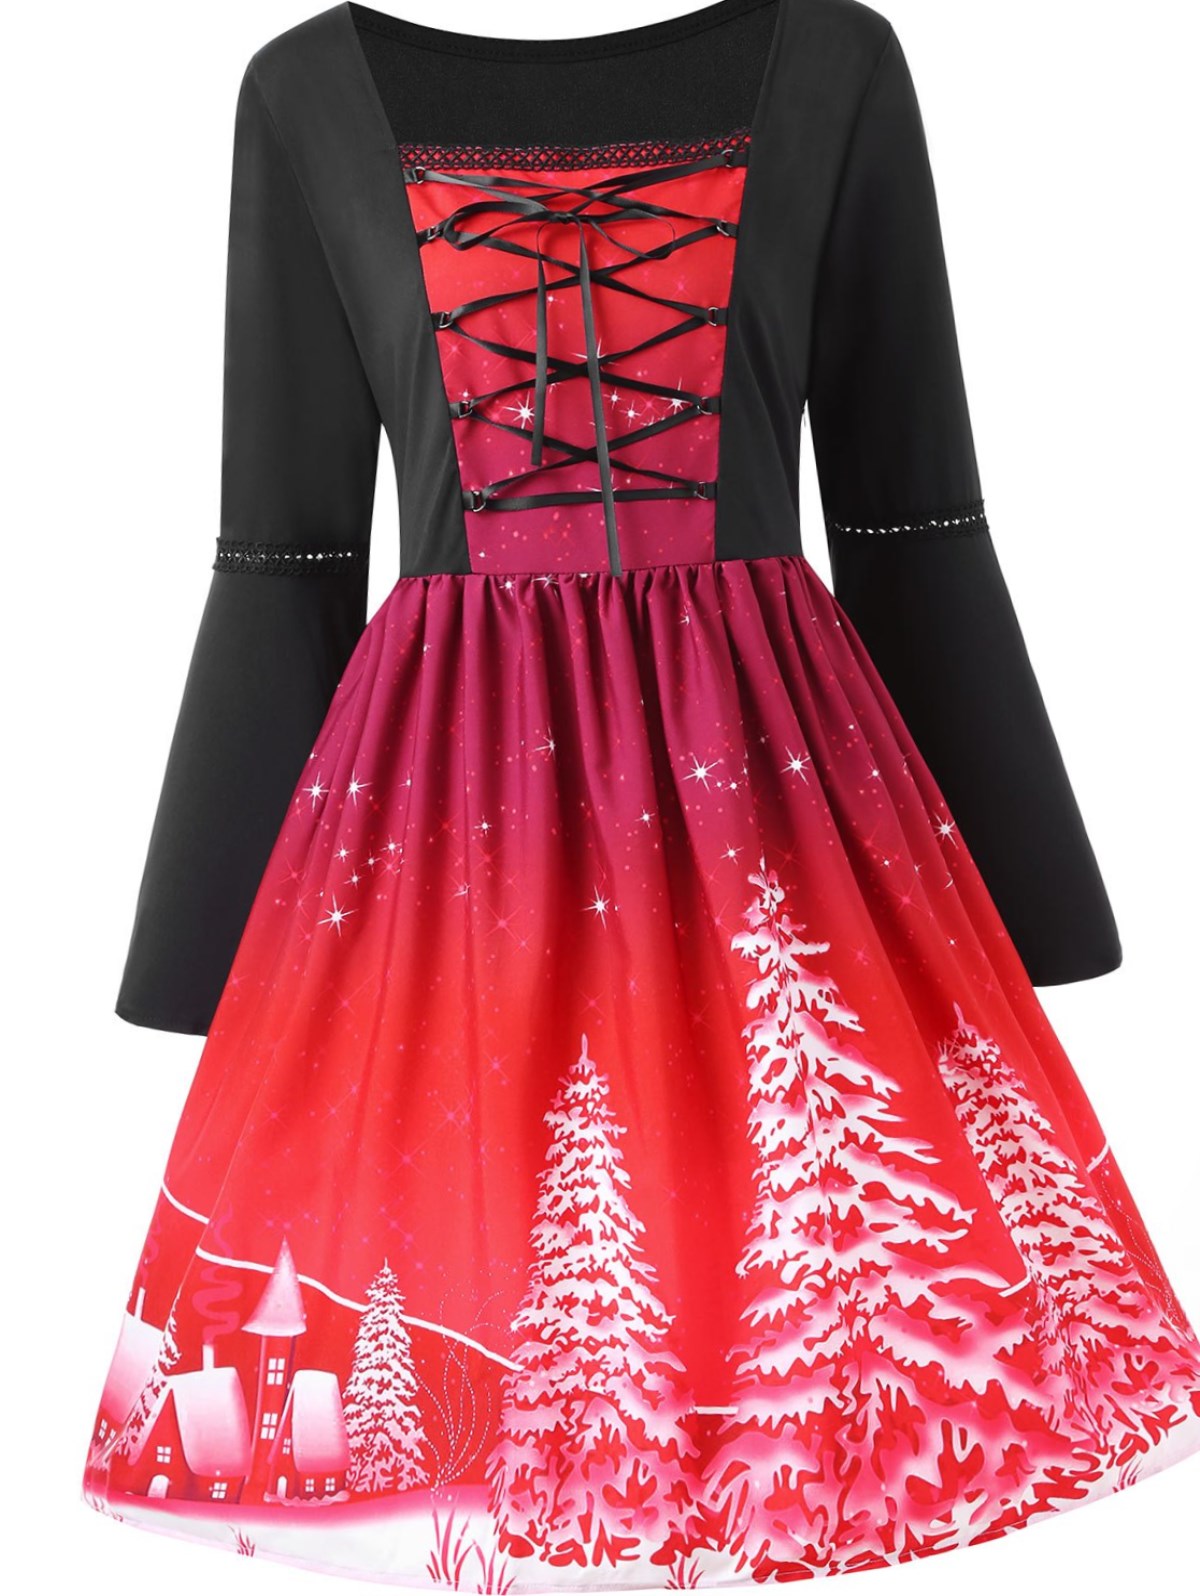 Christmas party dress 2019